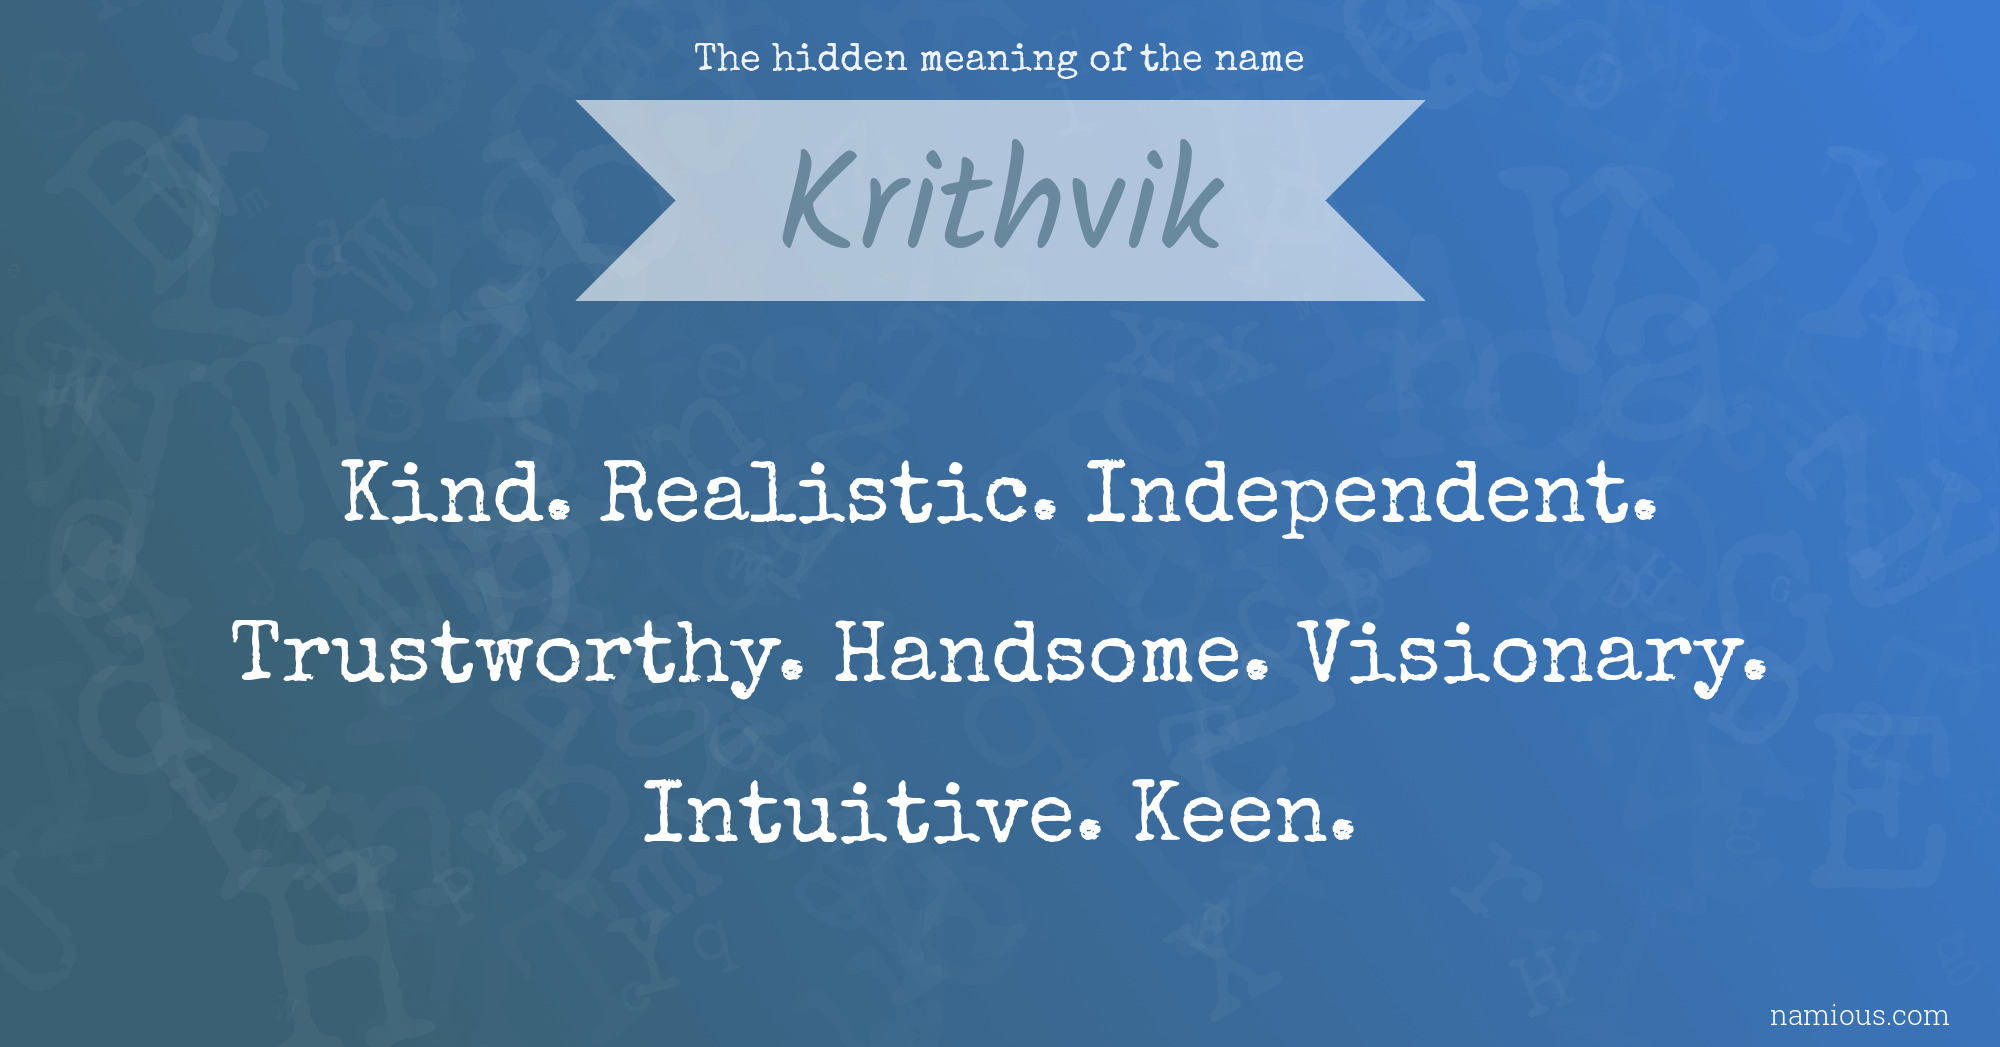 The hidden meaning of the name Krithvik